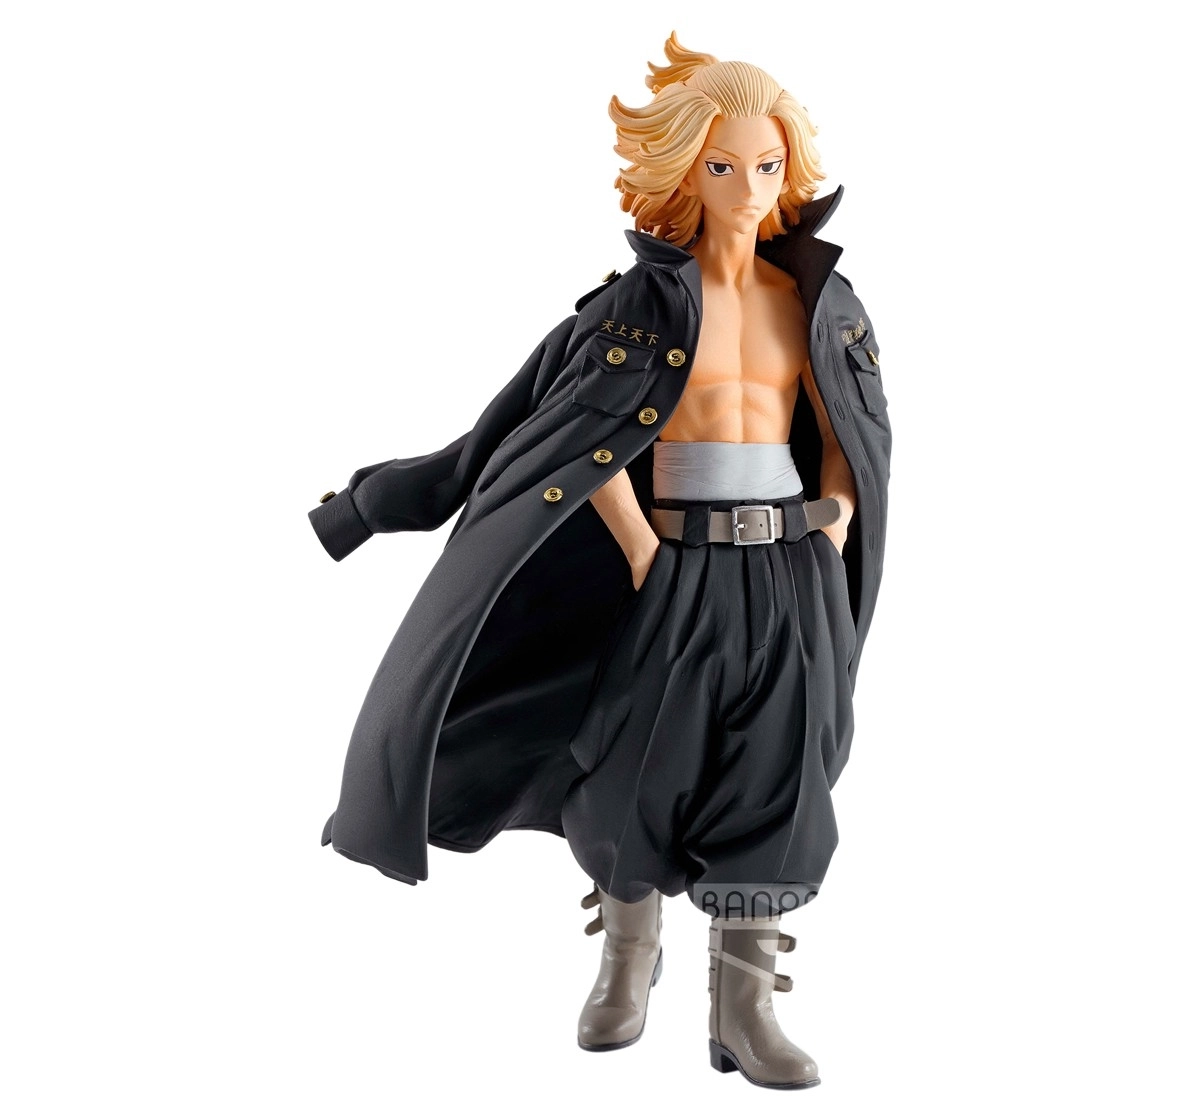 Banpresto Tokyo Revengers Mikey Manjiro Sano Figure Vol 2, Collectible Toys for Adults & Kids,Showpiece for Home Dcor, Office Desk and Study Table